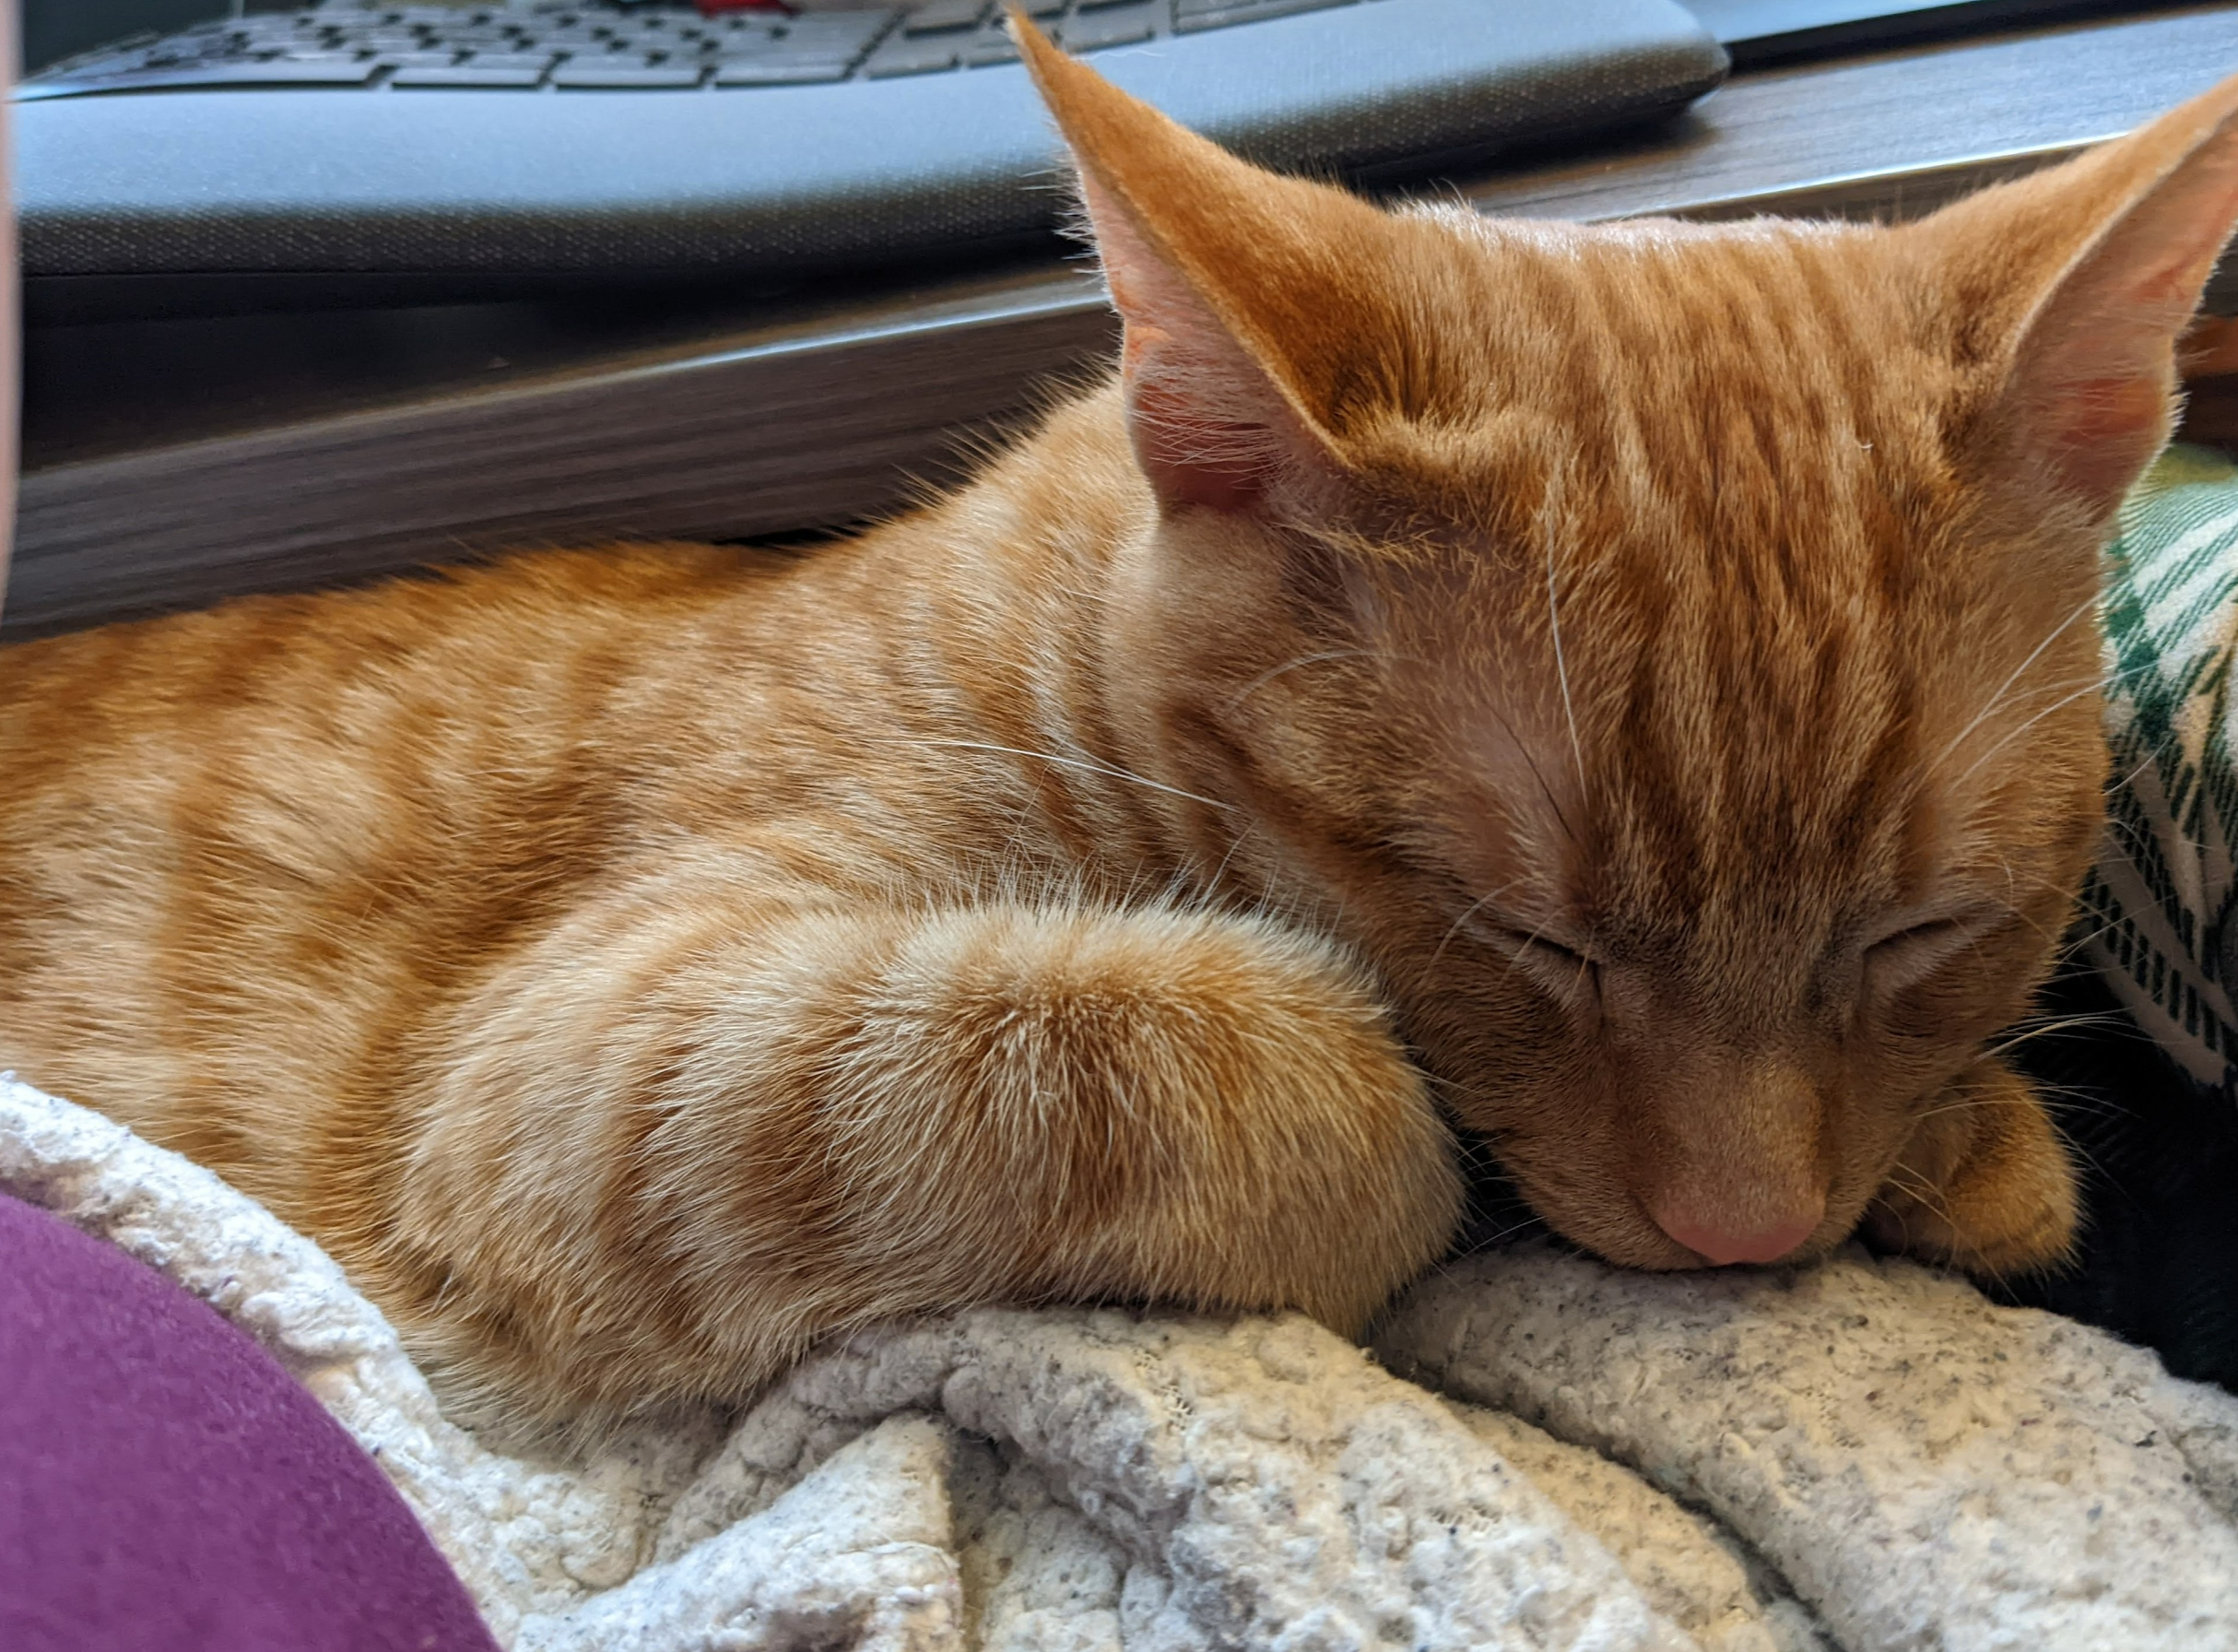 Bert, a sleepy orange tabby, snoozing on top of a blanket. He's in my lap as I sit at my desk, trying to work. He's very, very, VERY cute.